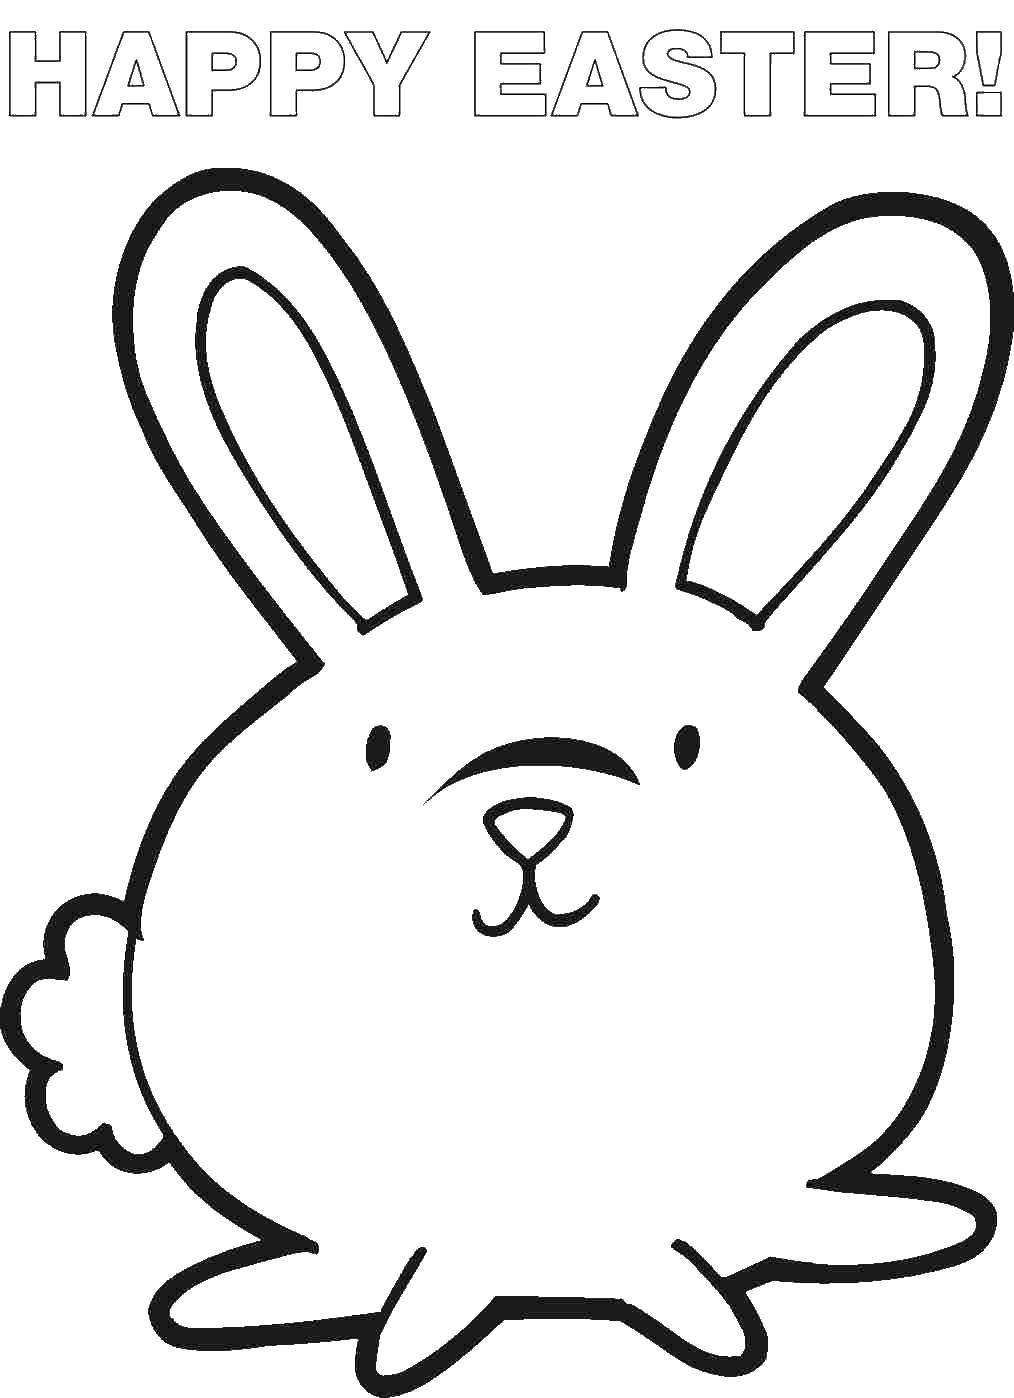 Coloring Round rabbit. Category the rabbit. Tags:  the rabbit.